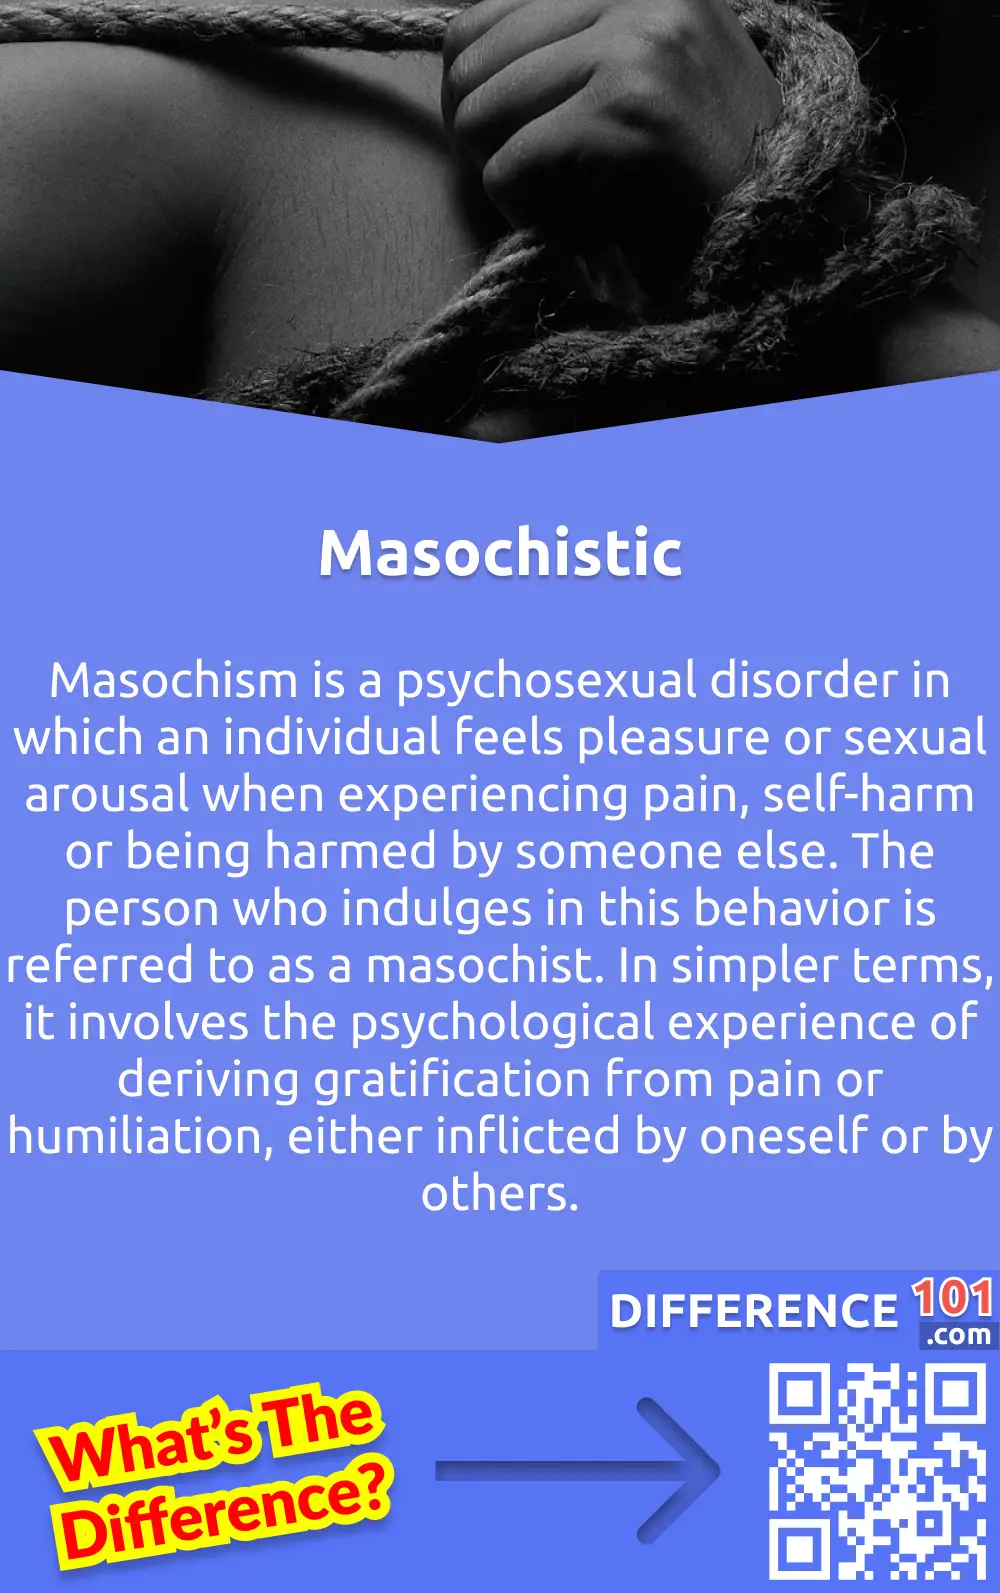 What Is Masochistic? Masochism is a psychosexual disorder in which an individual feels pleasure or sexual arousal when experiencing pain, self-harm or being harmed by someone else. The person who indulges in this behavior is referred to as a masochist. In simpler terms, it involves the psychological experience of deriving gratification from pain or humiliation, either inflicted by oneself or by others. However, it is important to note that not all masochistic tendencies are sexual in nature, and the concept can also manifest in non-sexual contexts. This behavior is considered abnormal and may impact an individual's mental health, and in many cases, requires professional intervention to overcome.